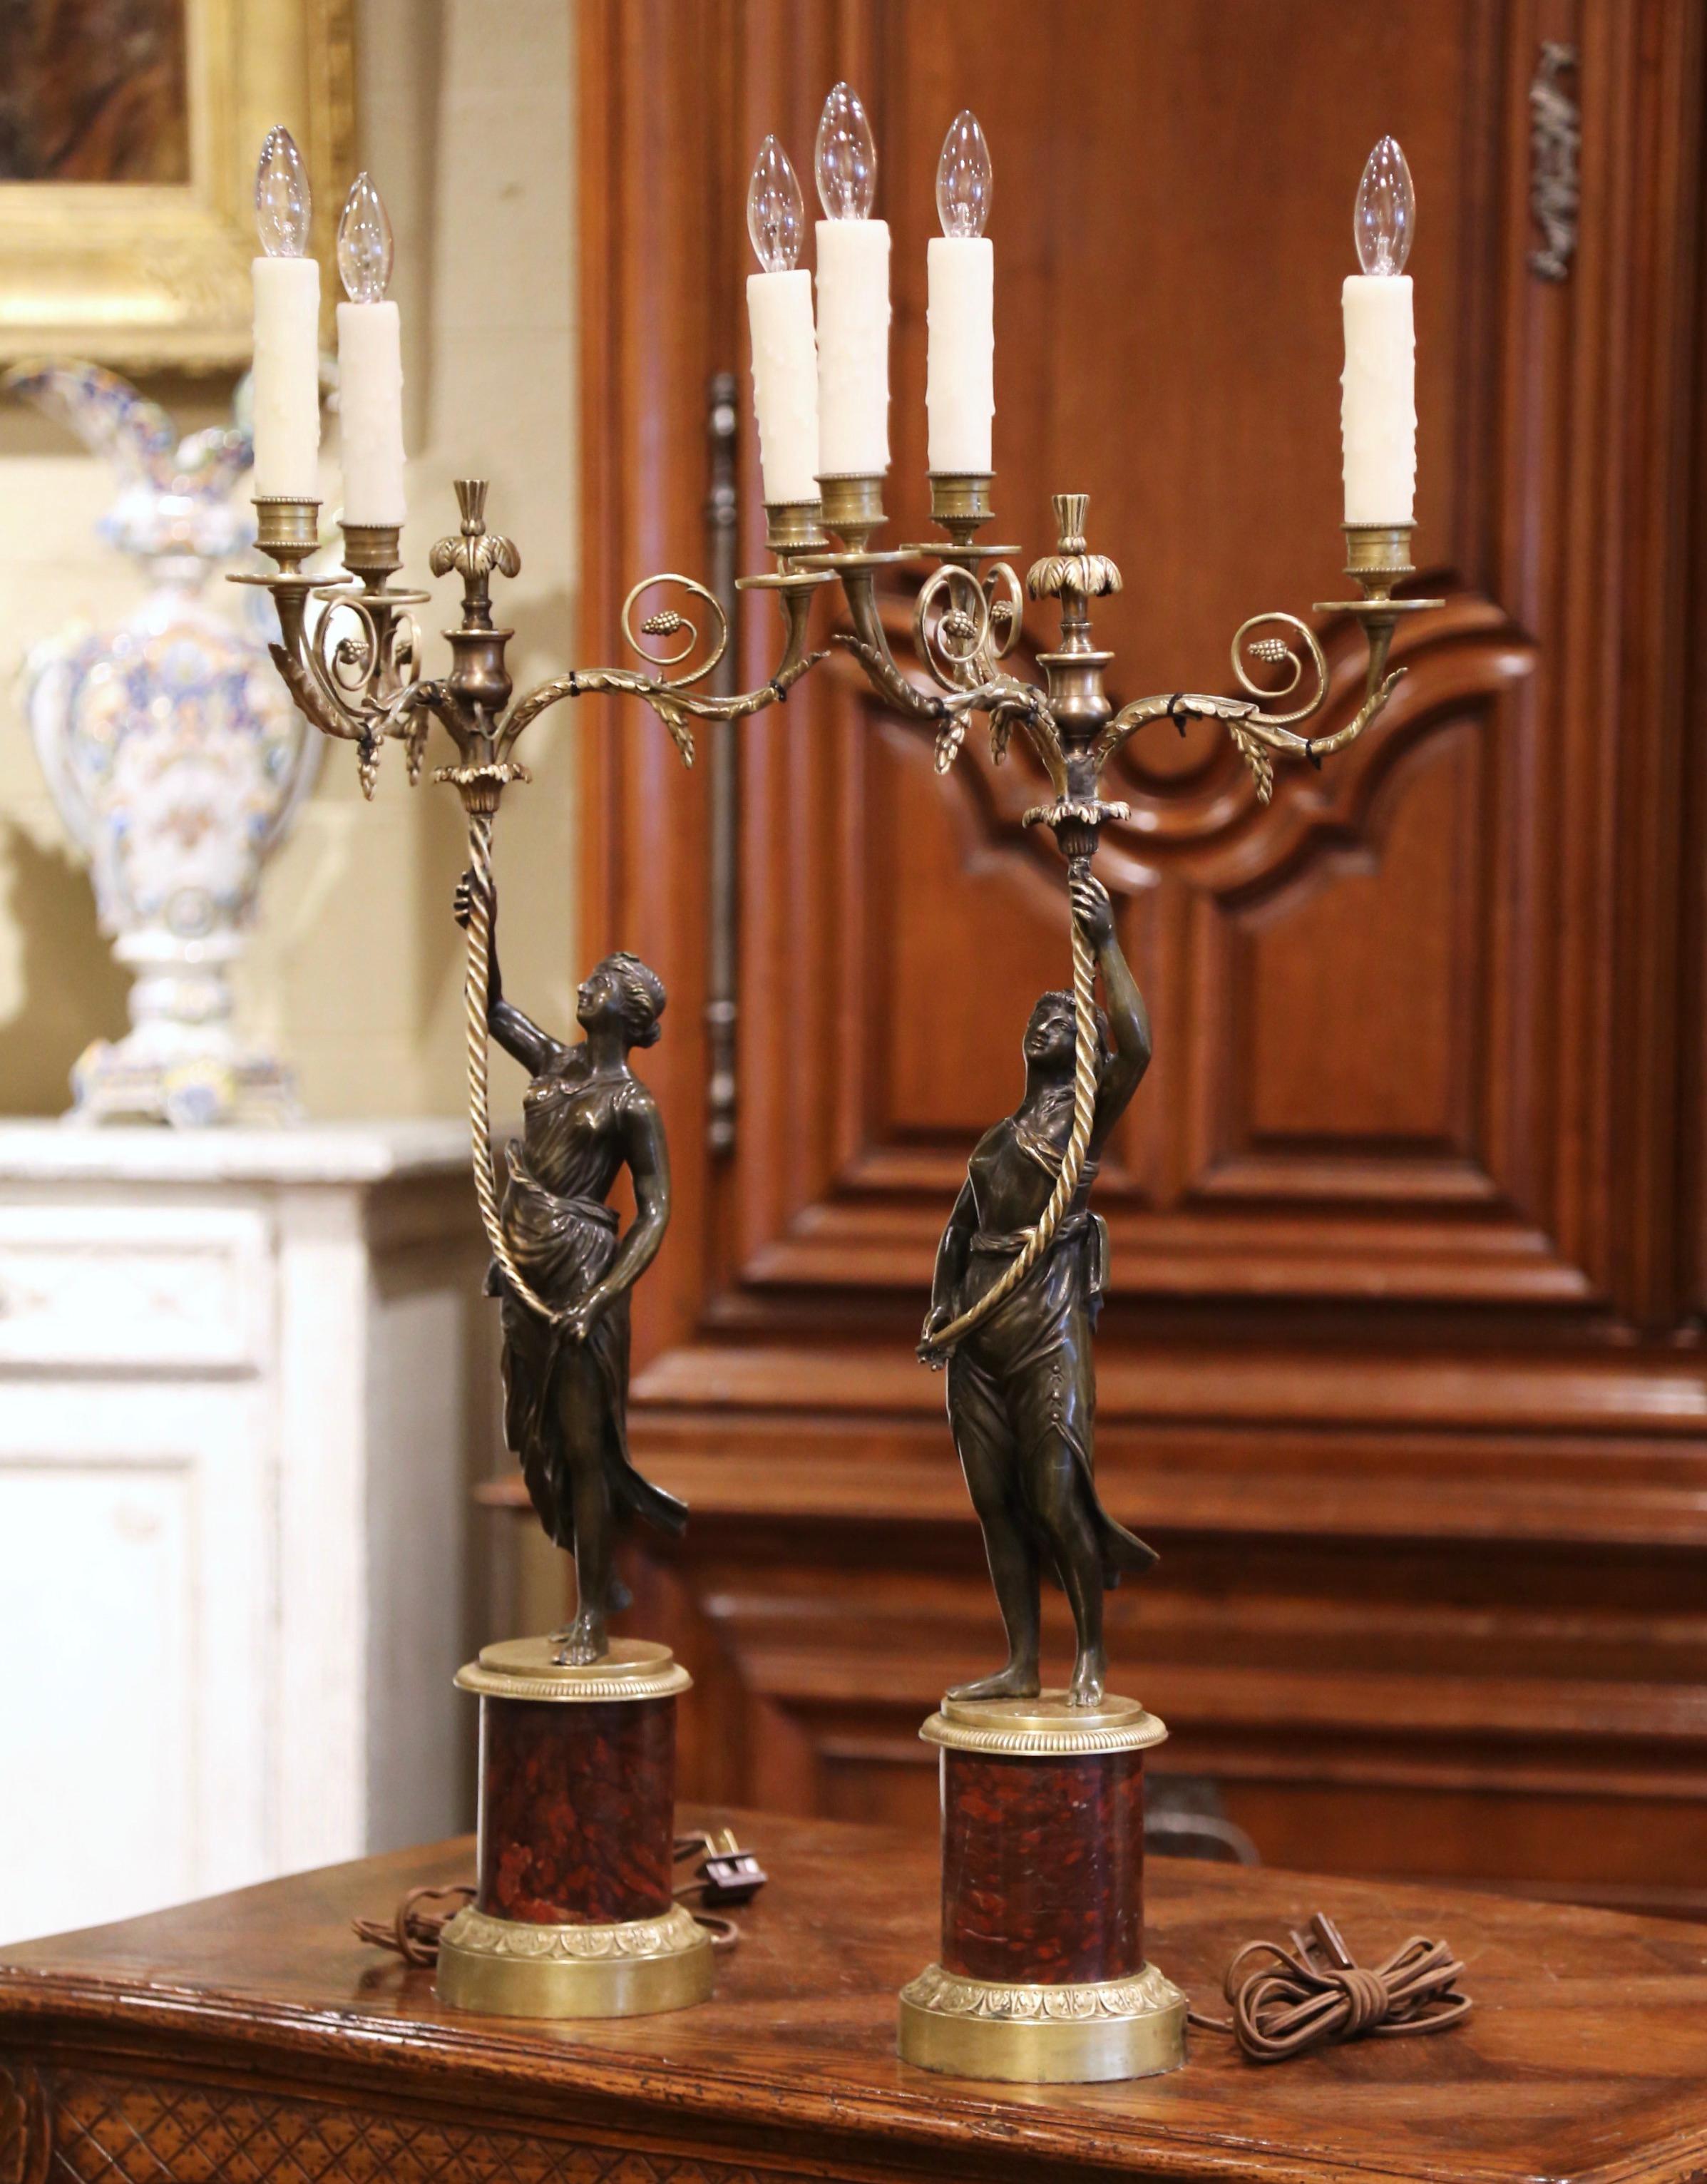 Crafted in France, circa 1880, each antique candelabra stands on a cylindrical marble plinth base, and features a bronze classical female figure holding a torch with three scrolled lights. Each tall table fixture is wired and dressed with real